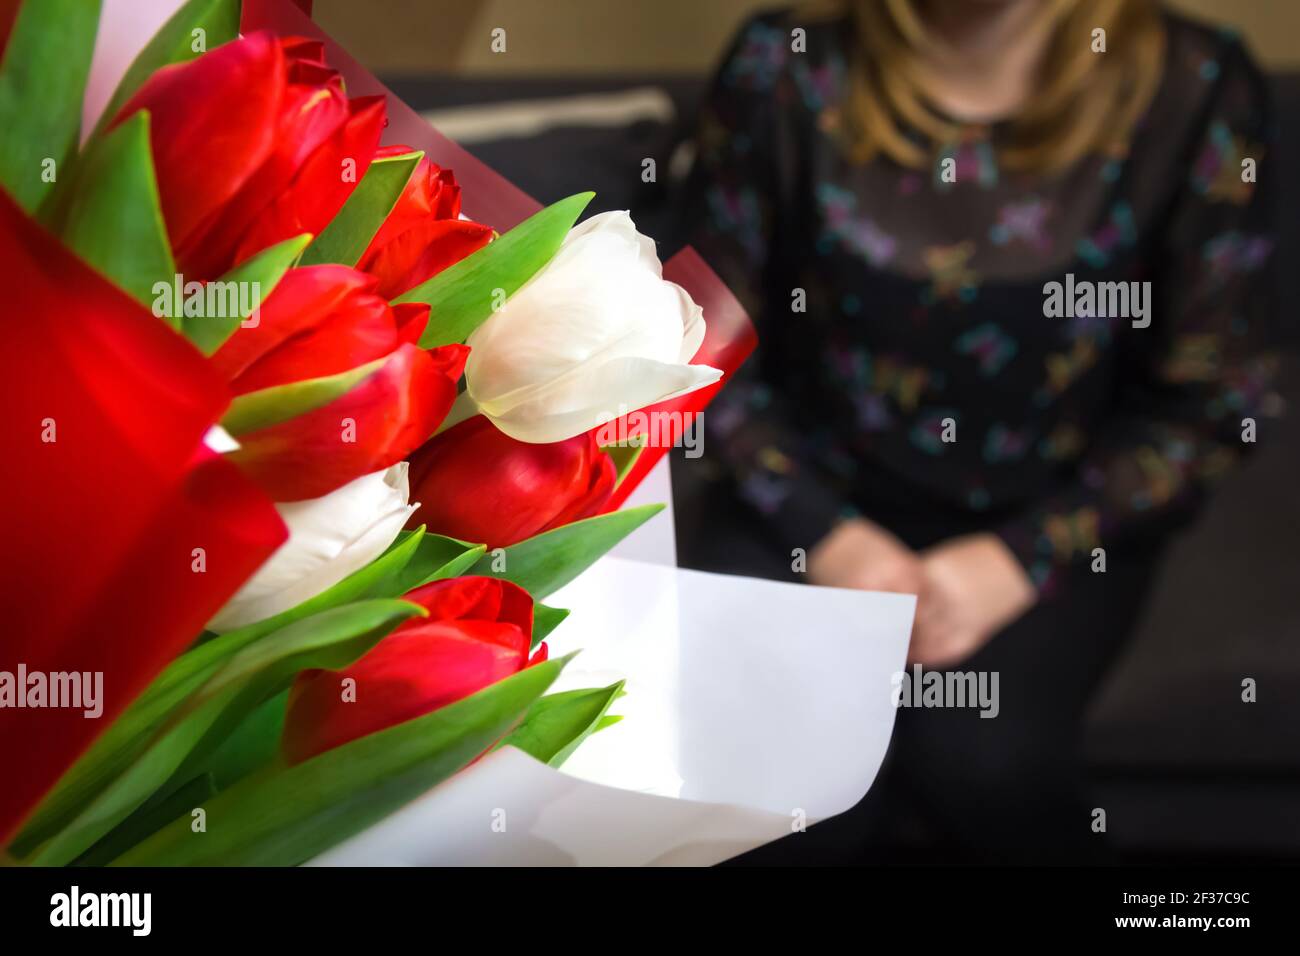 DEFOCUS Tulip women background. Bouquet of colorful tulips with blurred woman on background Happy Mother's Day concept. Women's day. Horizontal. 8 Stock Photo